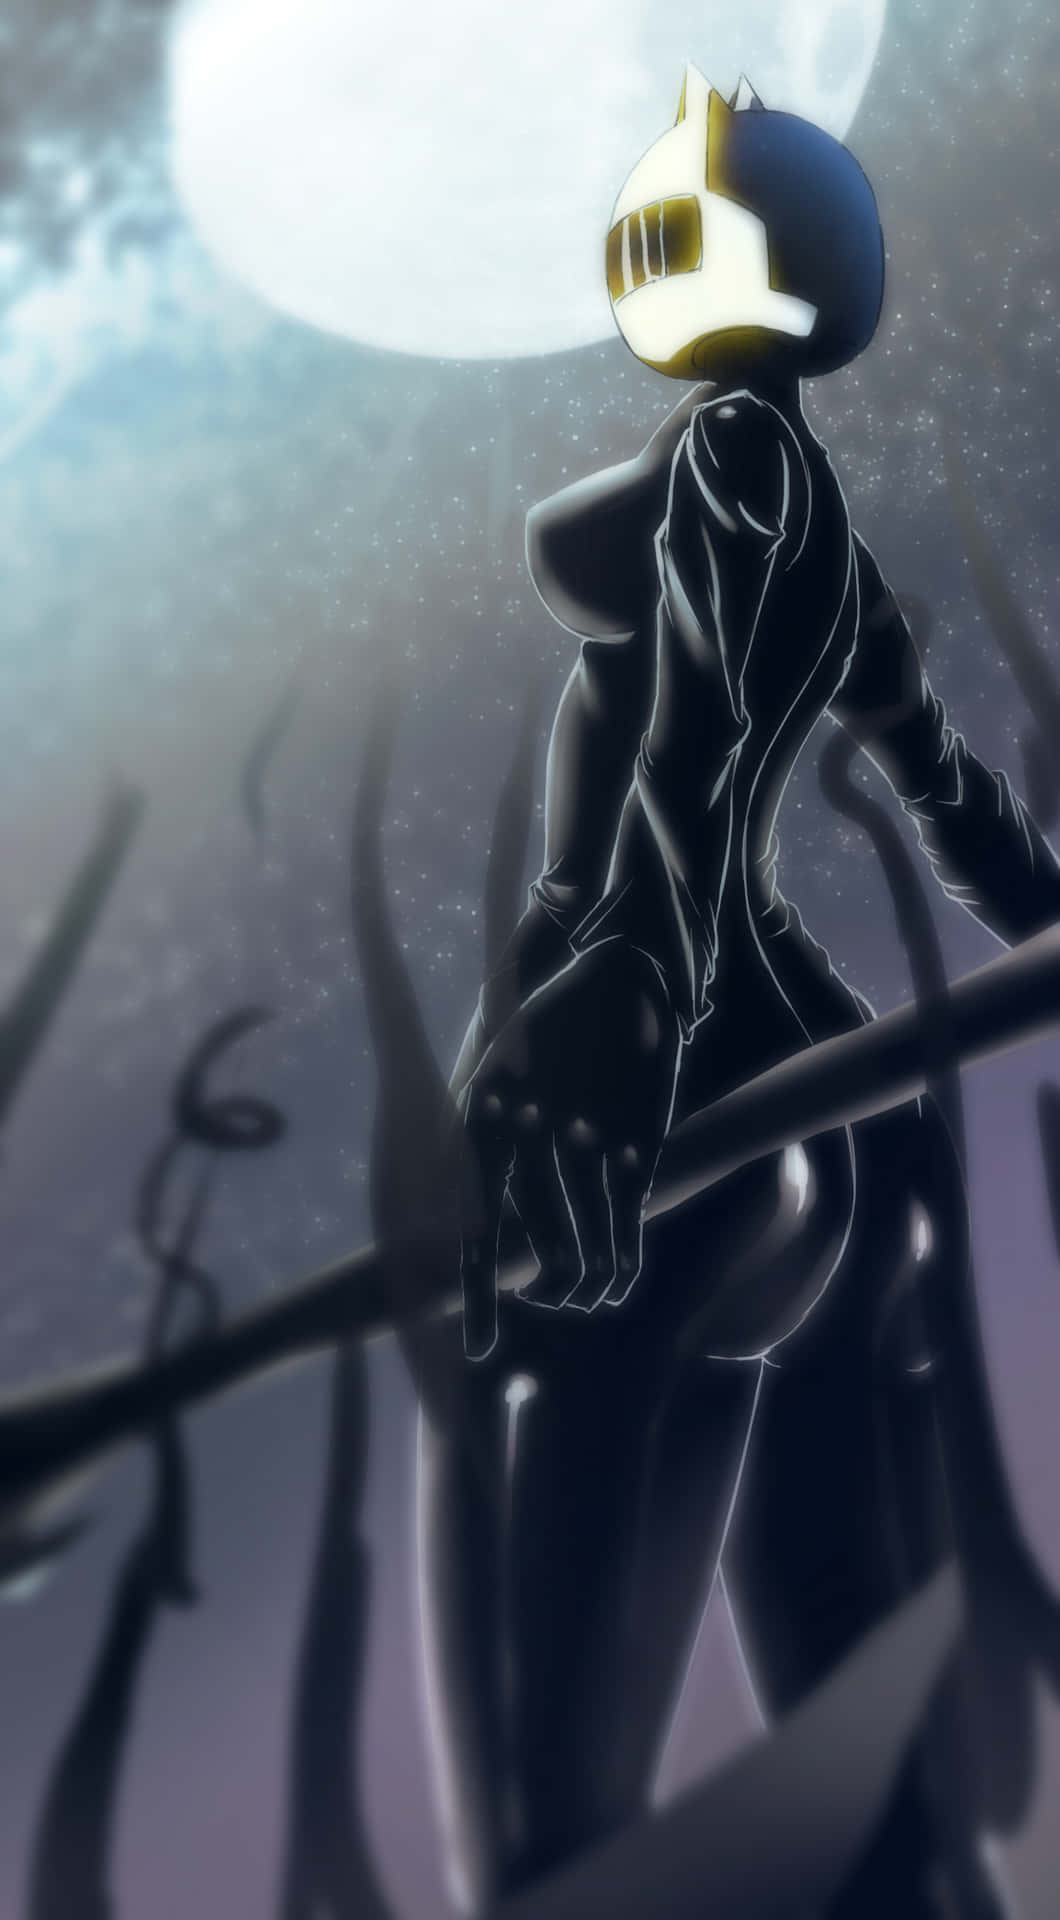 Spectacular image of Celty Sturluson in action Wallpaper